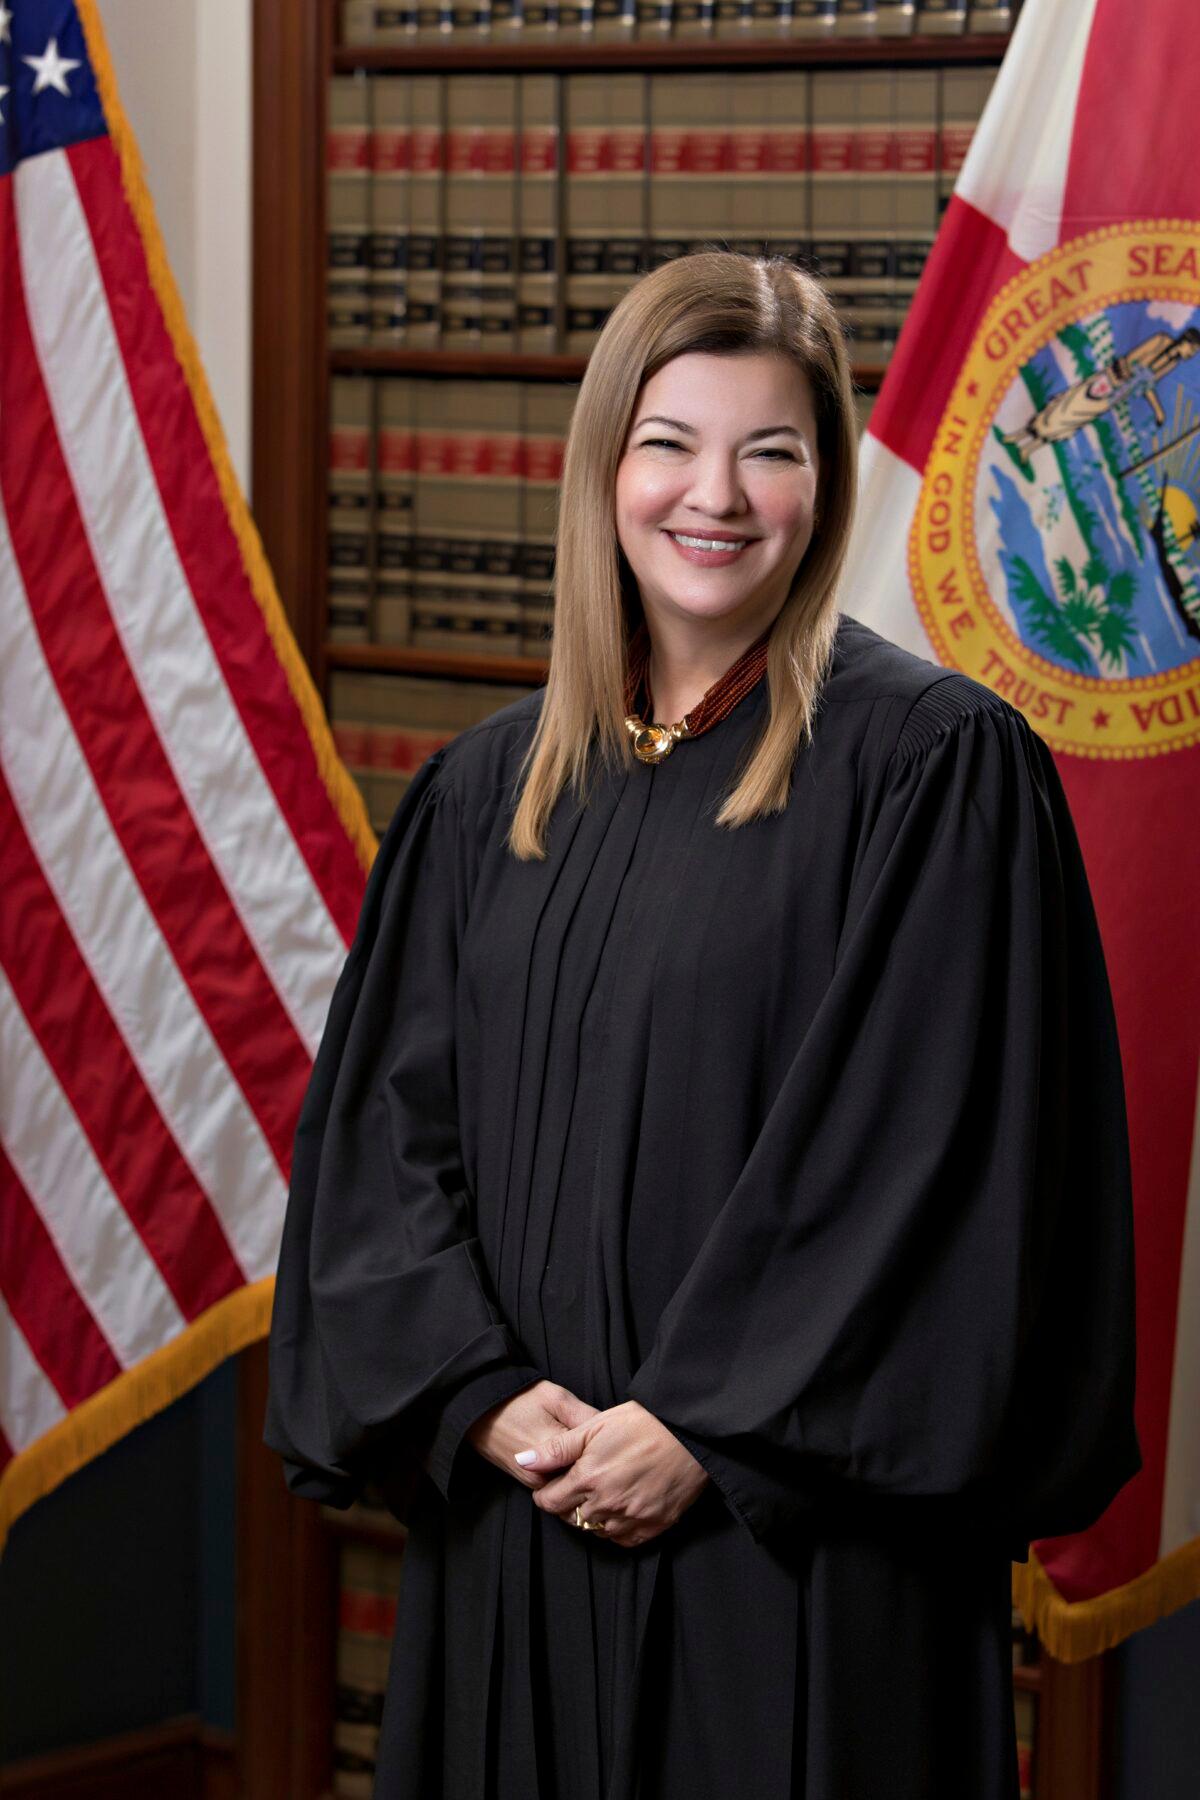 U.S. Circuit Judge Barbara Lagoa, of the United States Court of Appeals for the Eleventh Circuit, is shown in this official undated photo released by the Florida Supreme Court. (Florida Supreme Court/AP Photo)